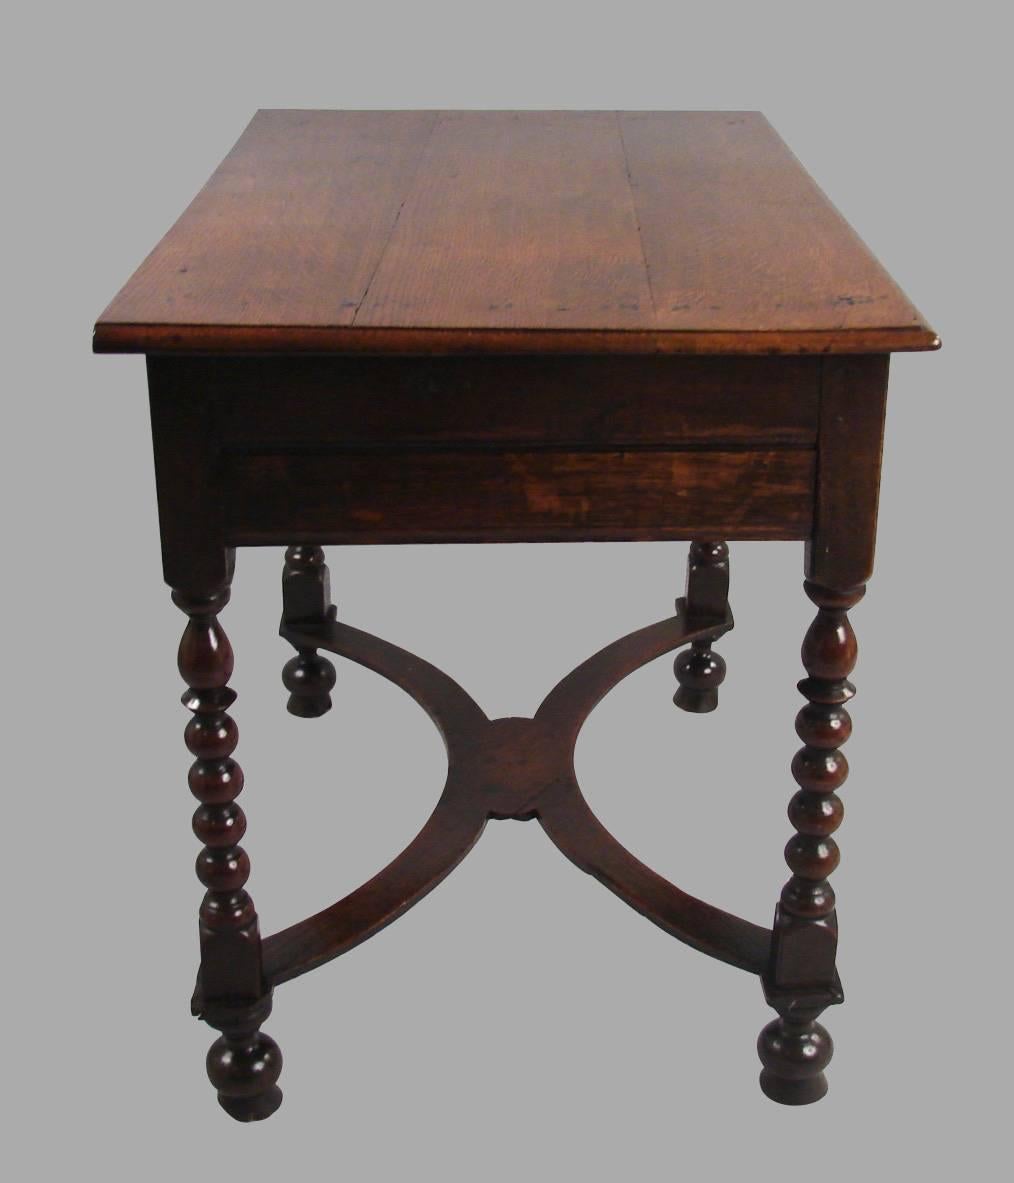 English William and Mary Oak Table with Drawer